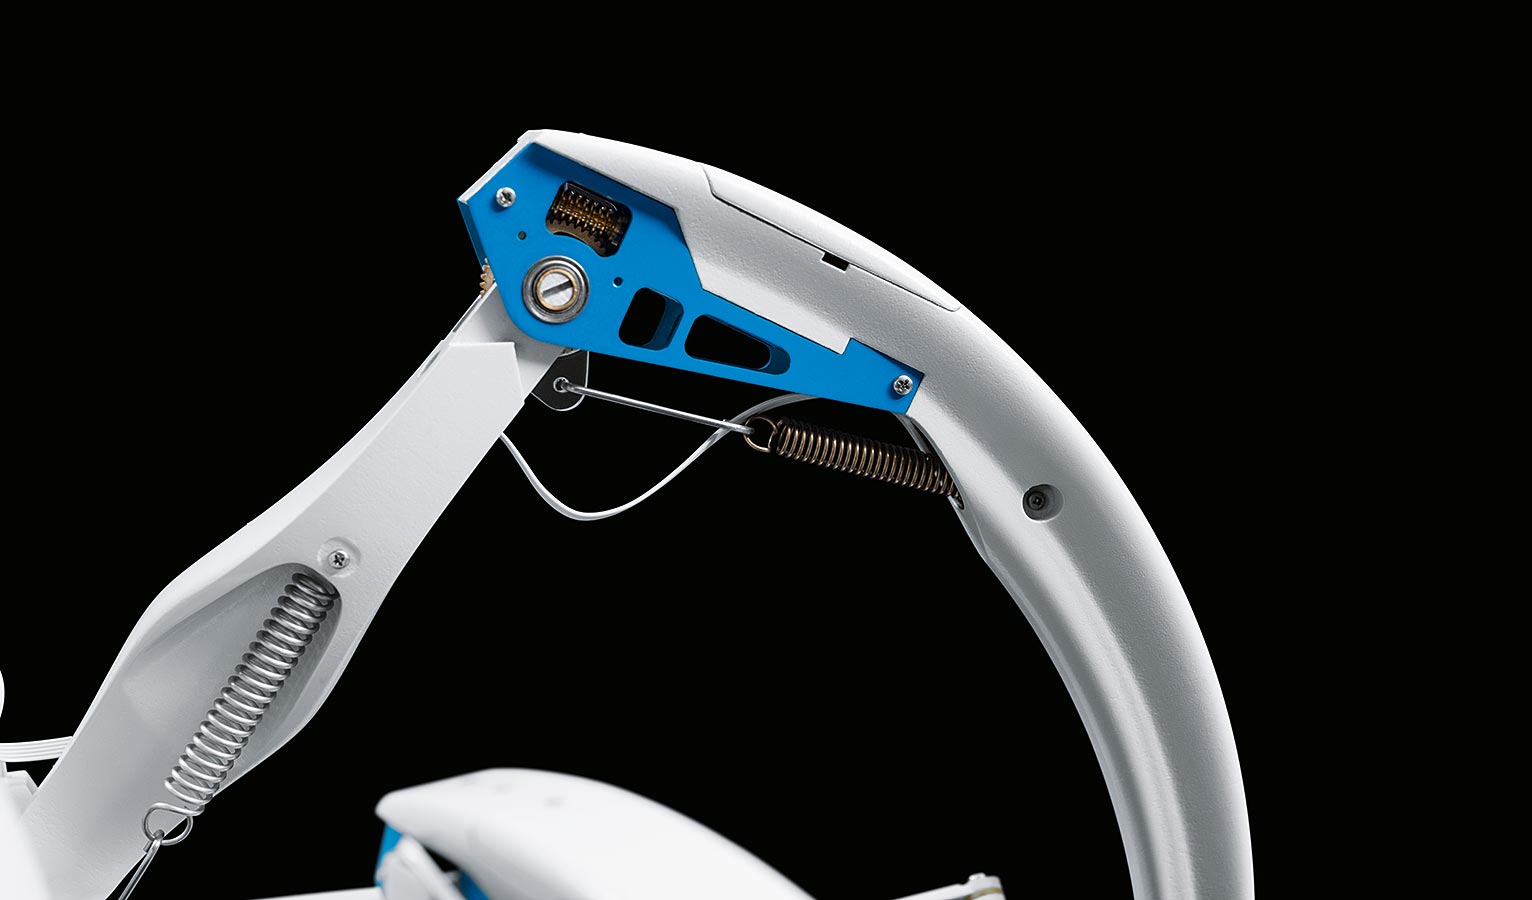 Springs built into leg joints assist the bot’s movements. Source: Festo